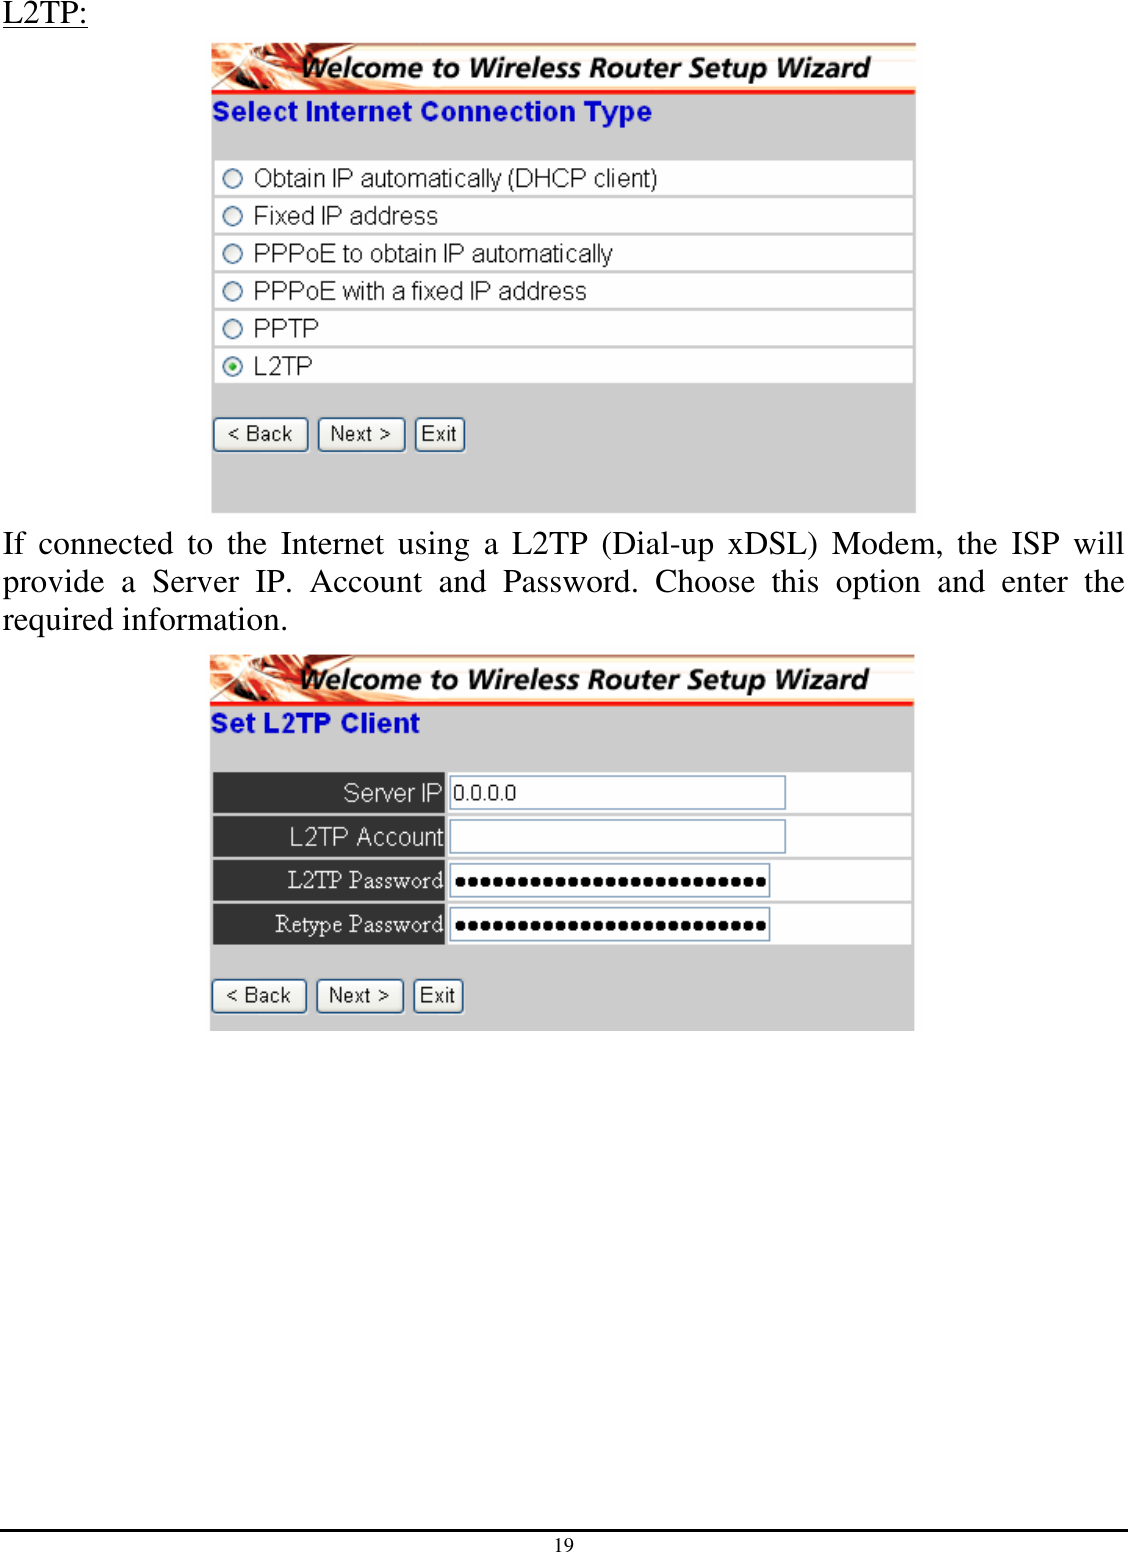 19 L2TP:  If  connected  to  the Internet  using  a  L2TP  (Dial-up  xDSL)  Modem,  the  ISP  will provide  a  Server  IP.  Account  and  Password.  Choose  this  option  and  enter  the required information.  